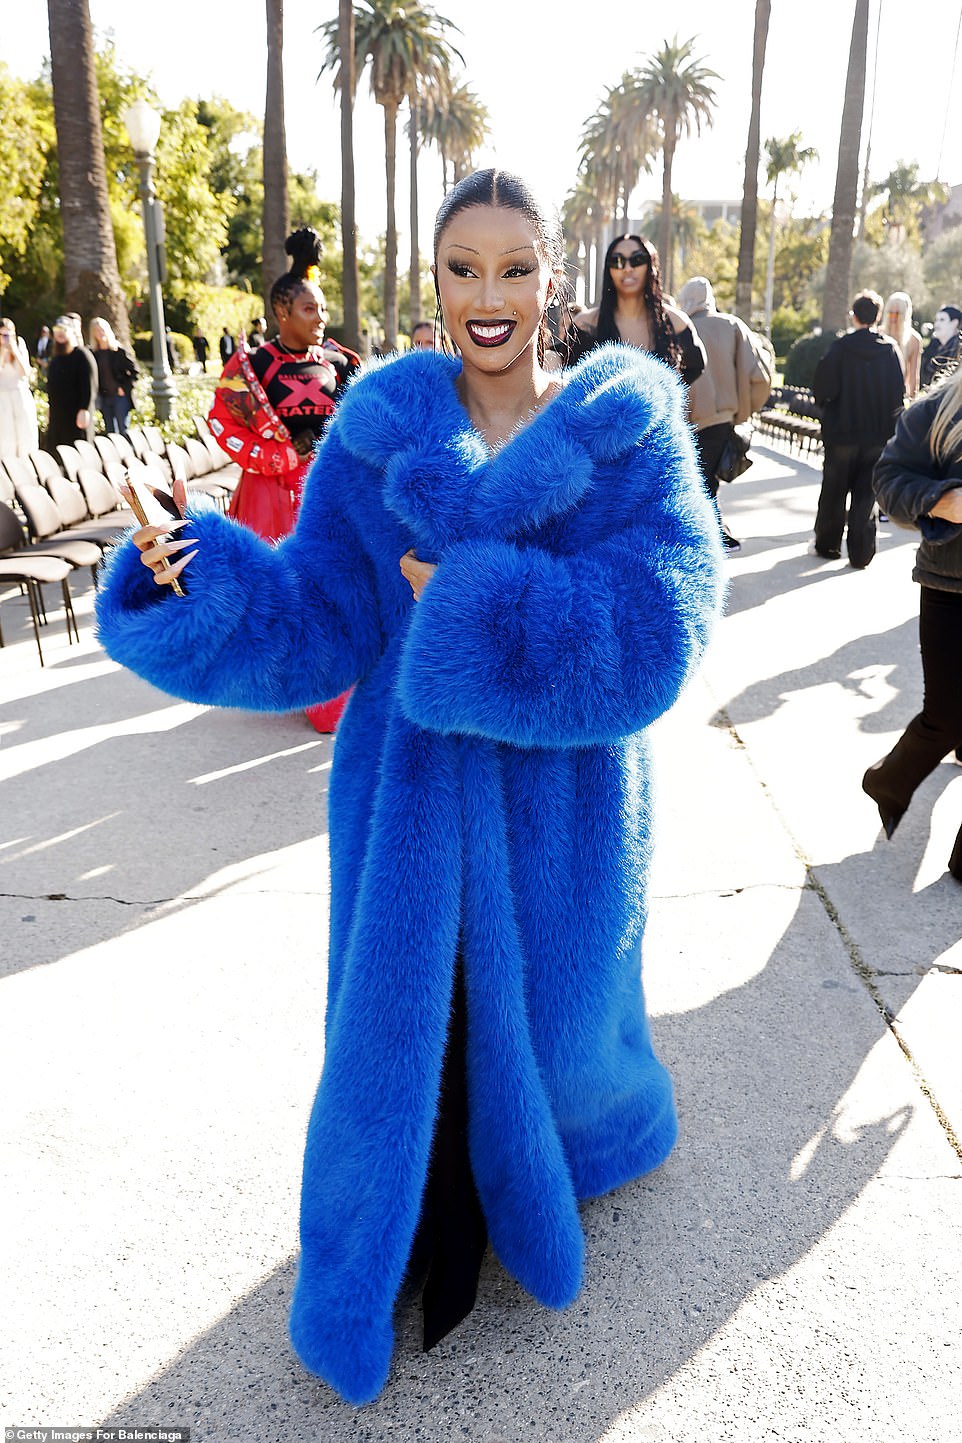 Rapper Cardi B, 31, was a vision in an opulent bight blue fur coat and later walked the Balenciaga runway